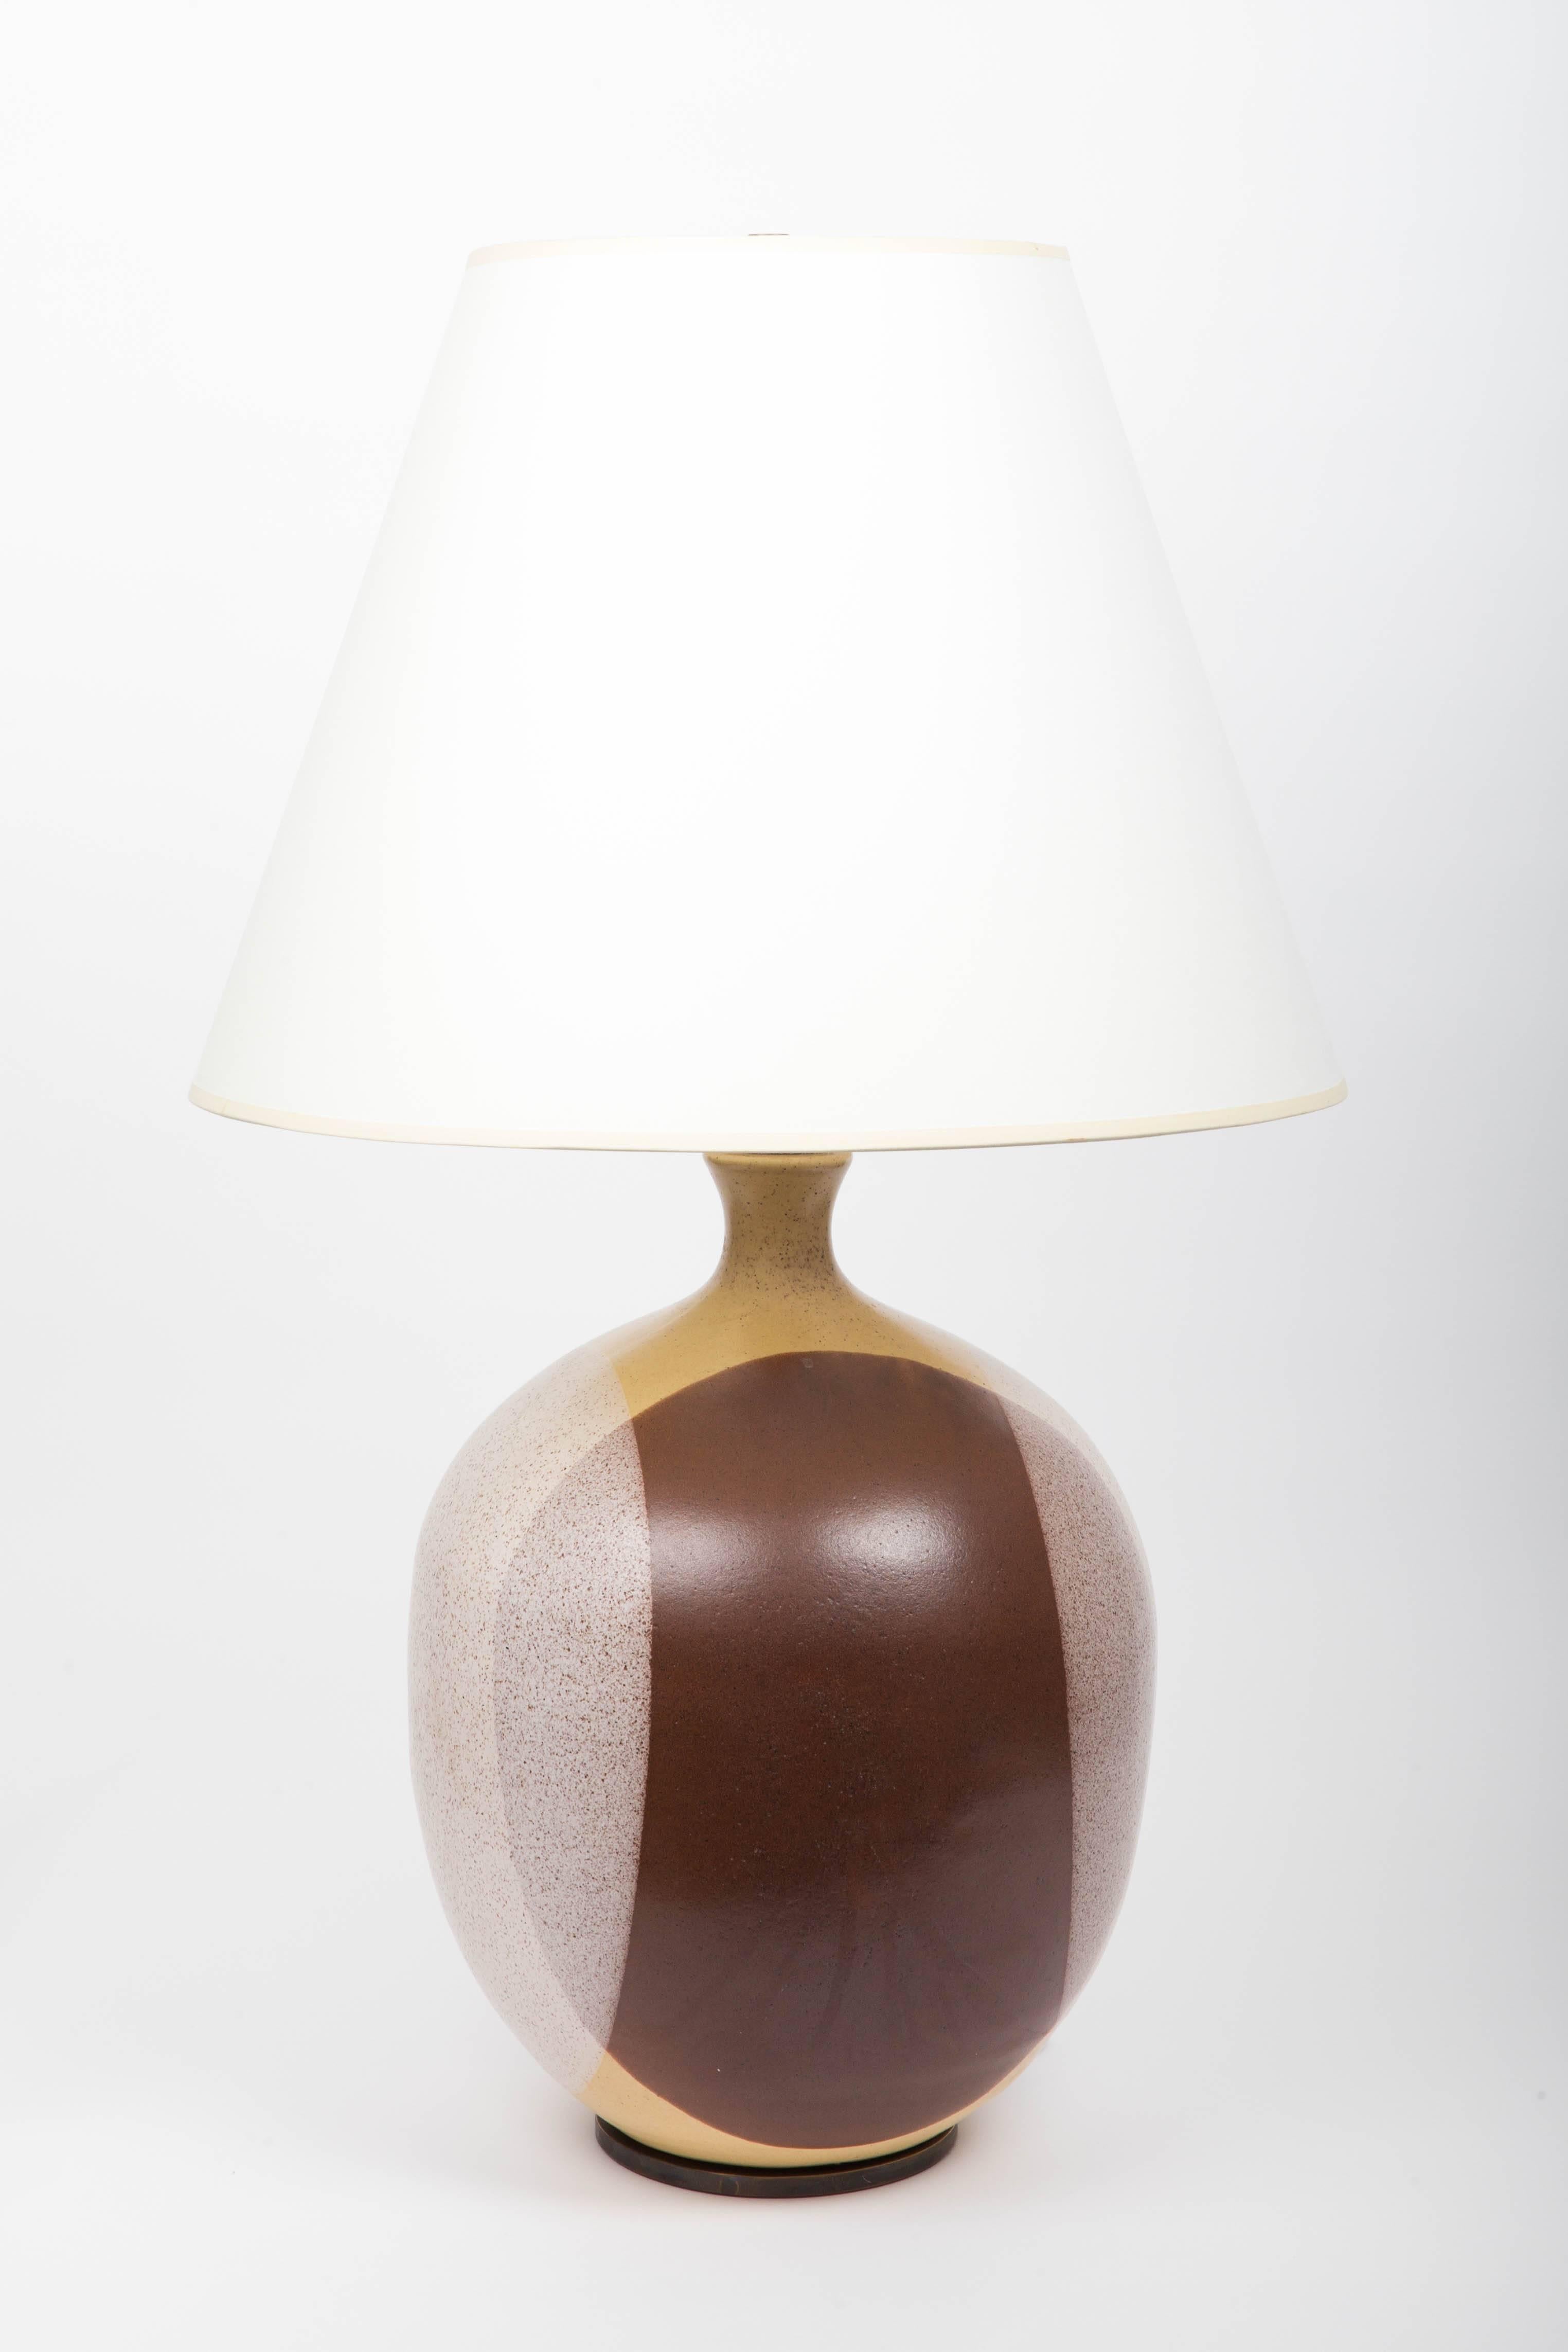 Ceramic lamp, attributed to David Cressey, 1950s

Shade not included
Newly rewired with black twisted silk cord and bronze finish on fittings.